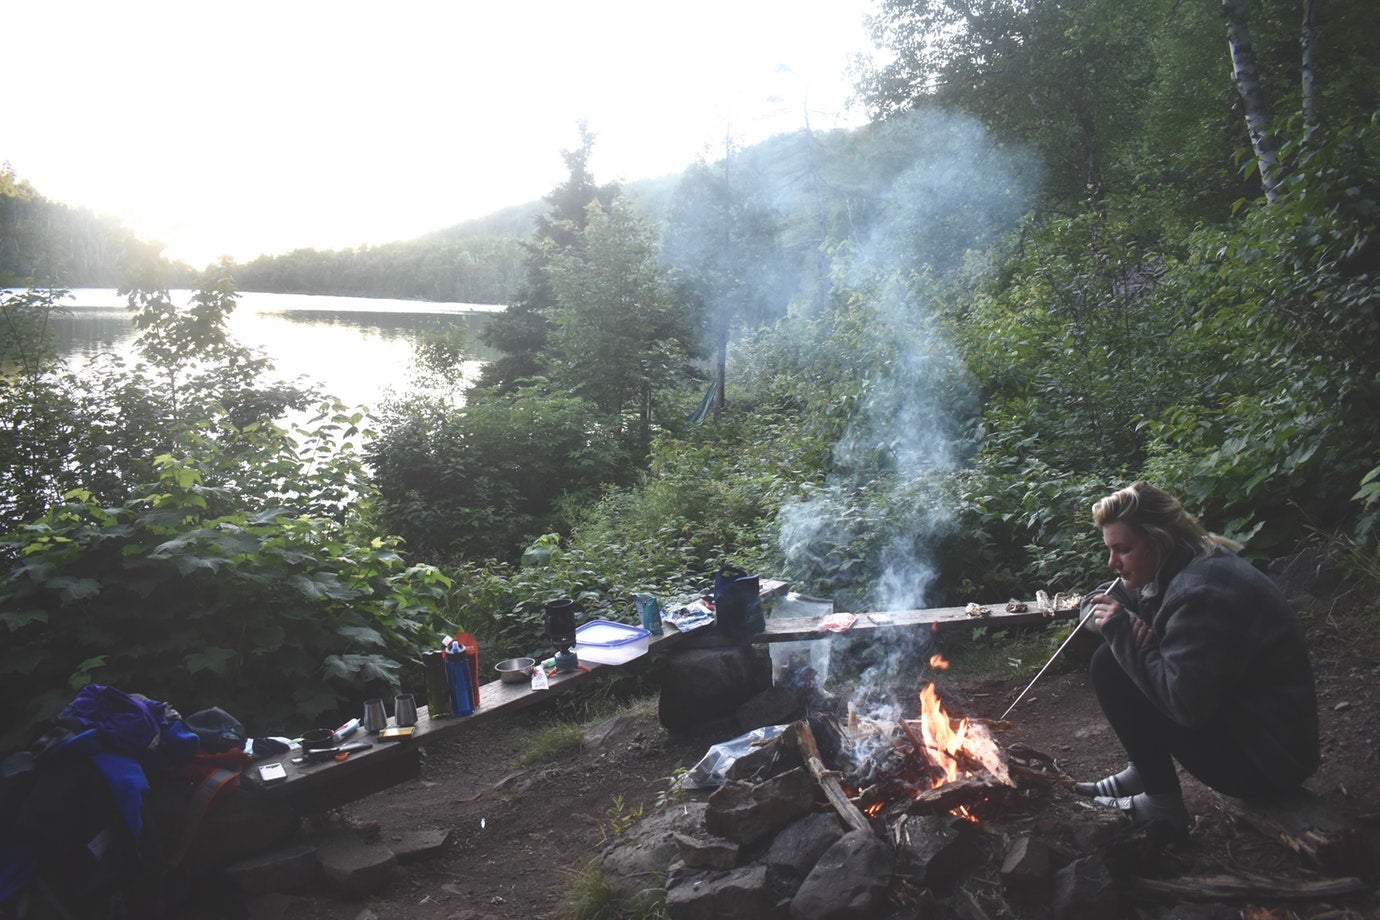 female camper pokes at campfire in the foreground with wooded lake in the background